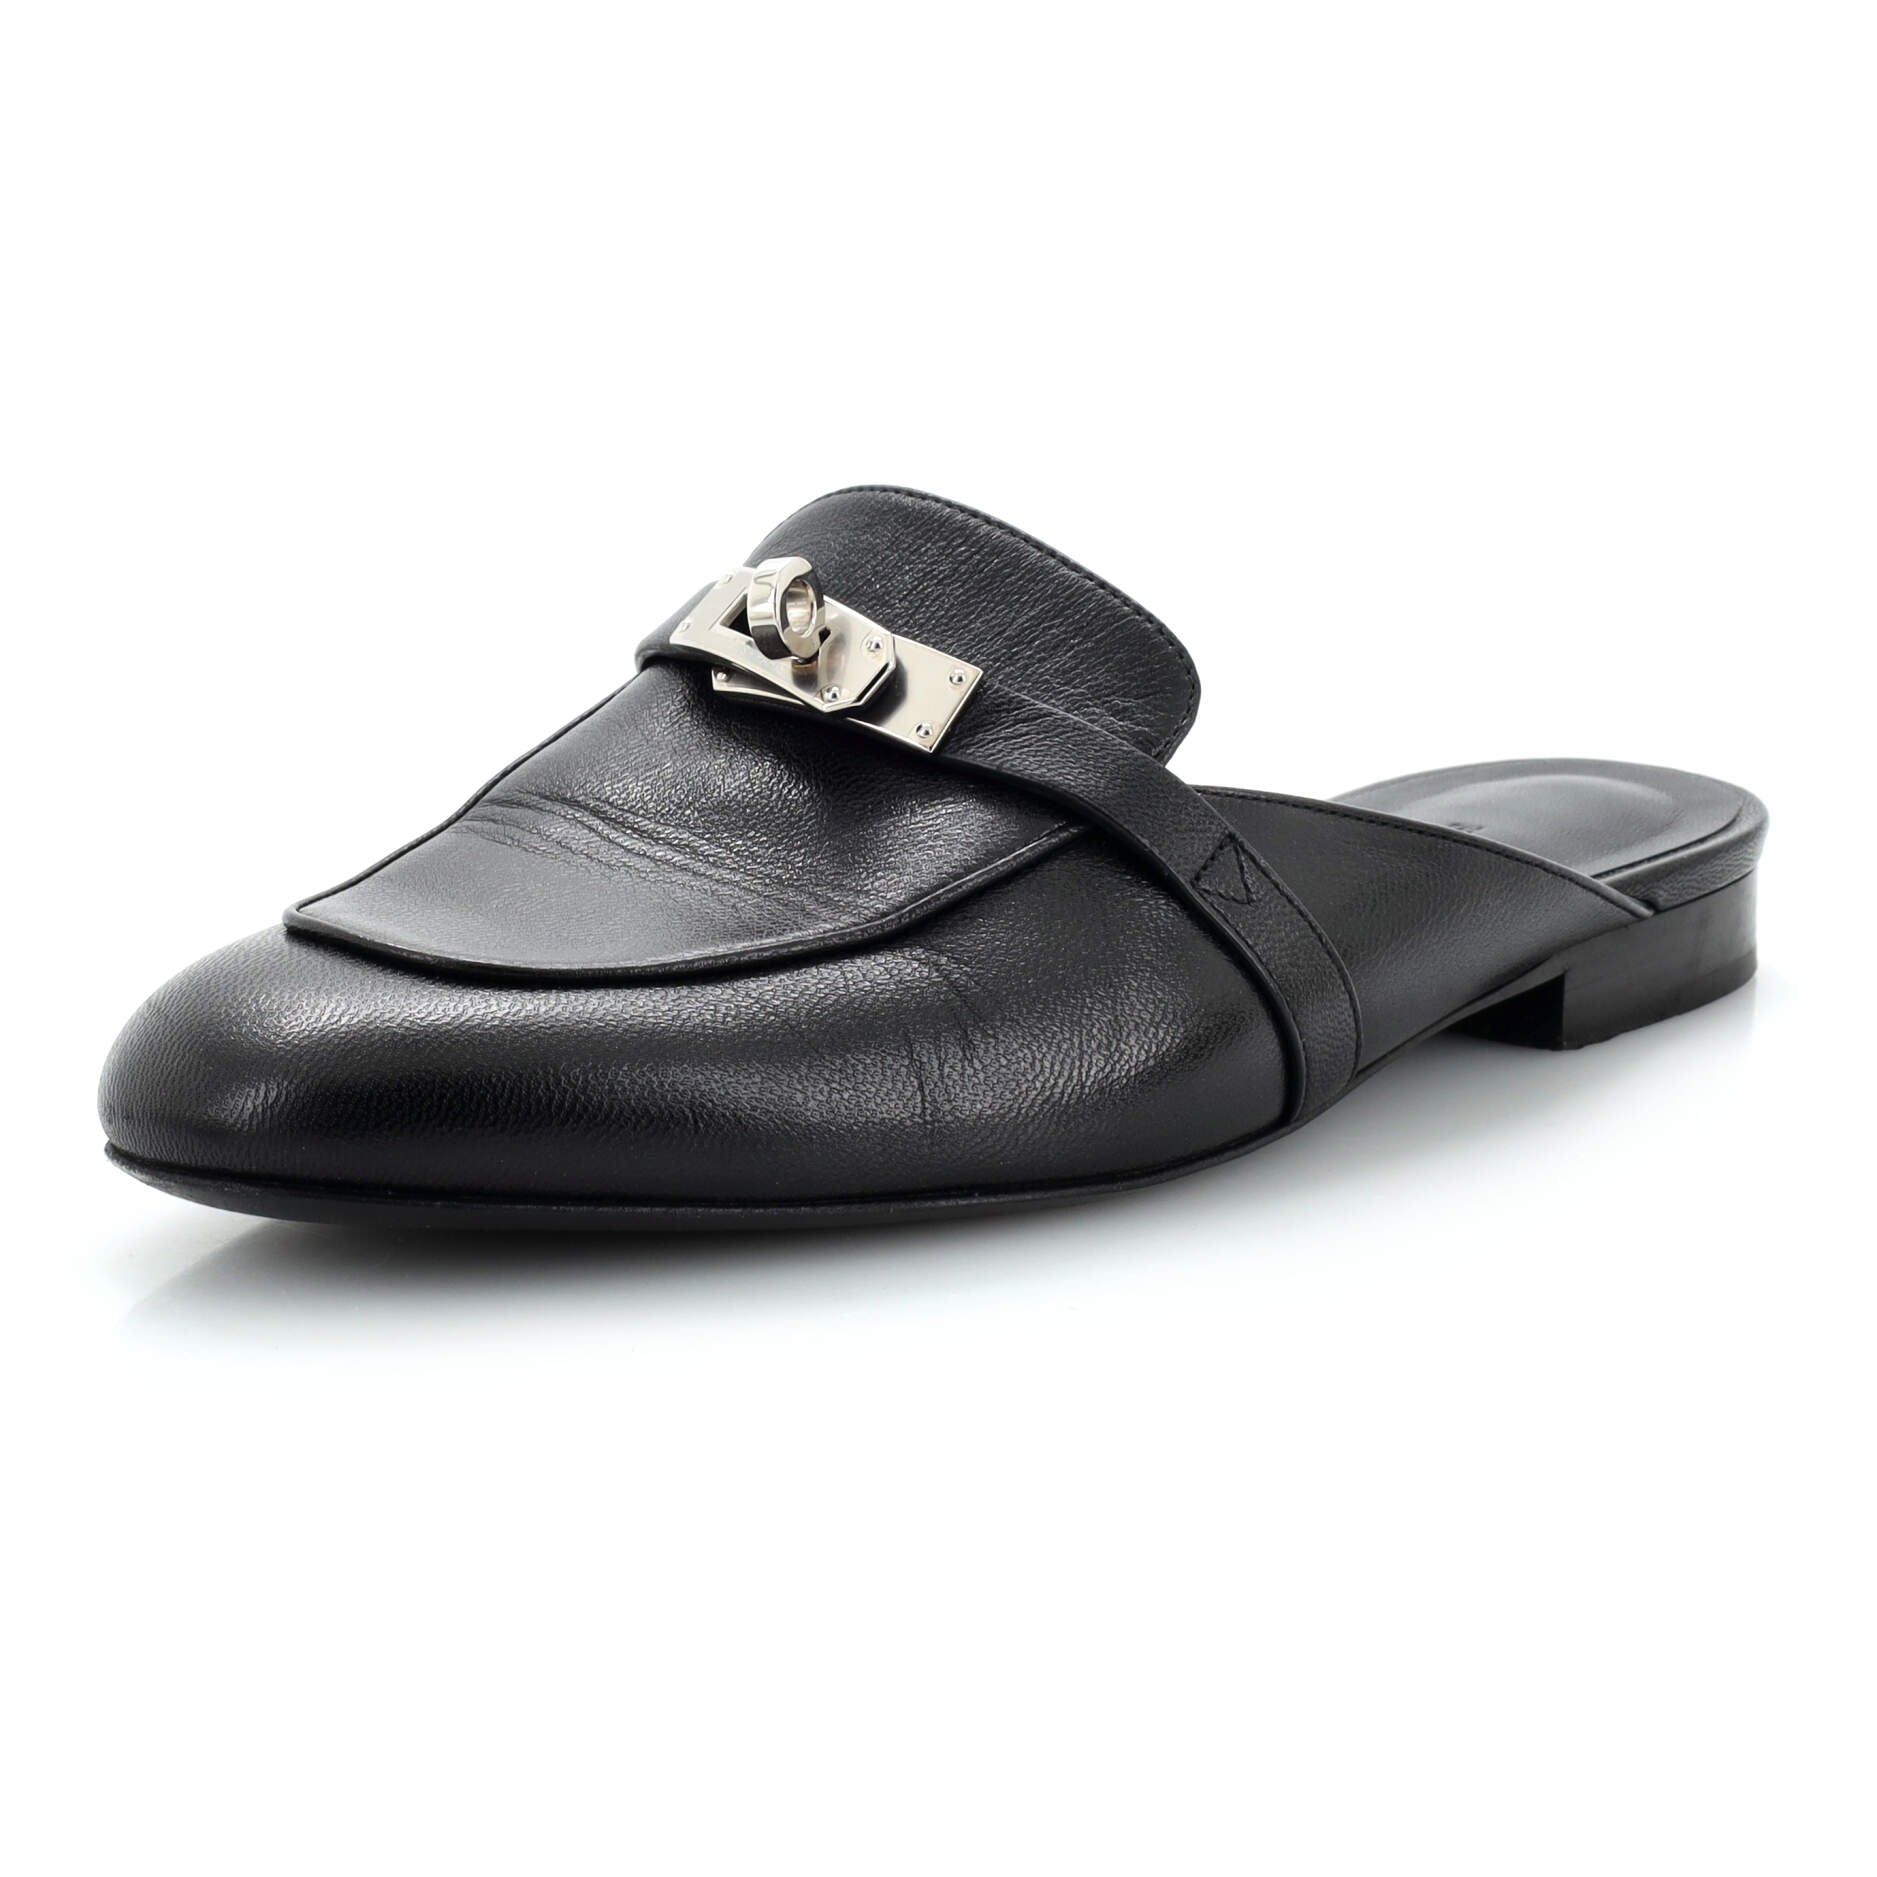 Women's Oz Mules Leather